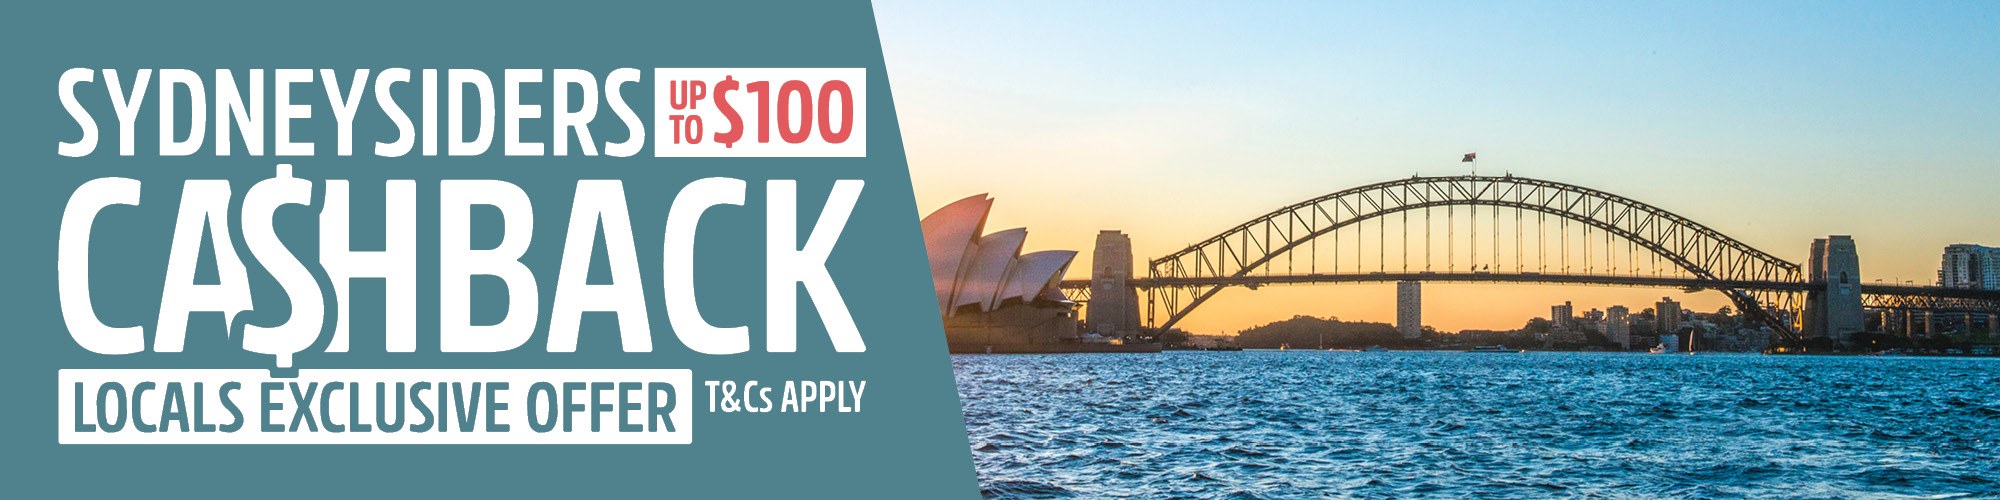 bridgeclimb's exclusive local cashback off for sydneysiders, climb and get up to $100 back